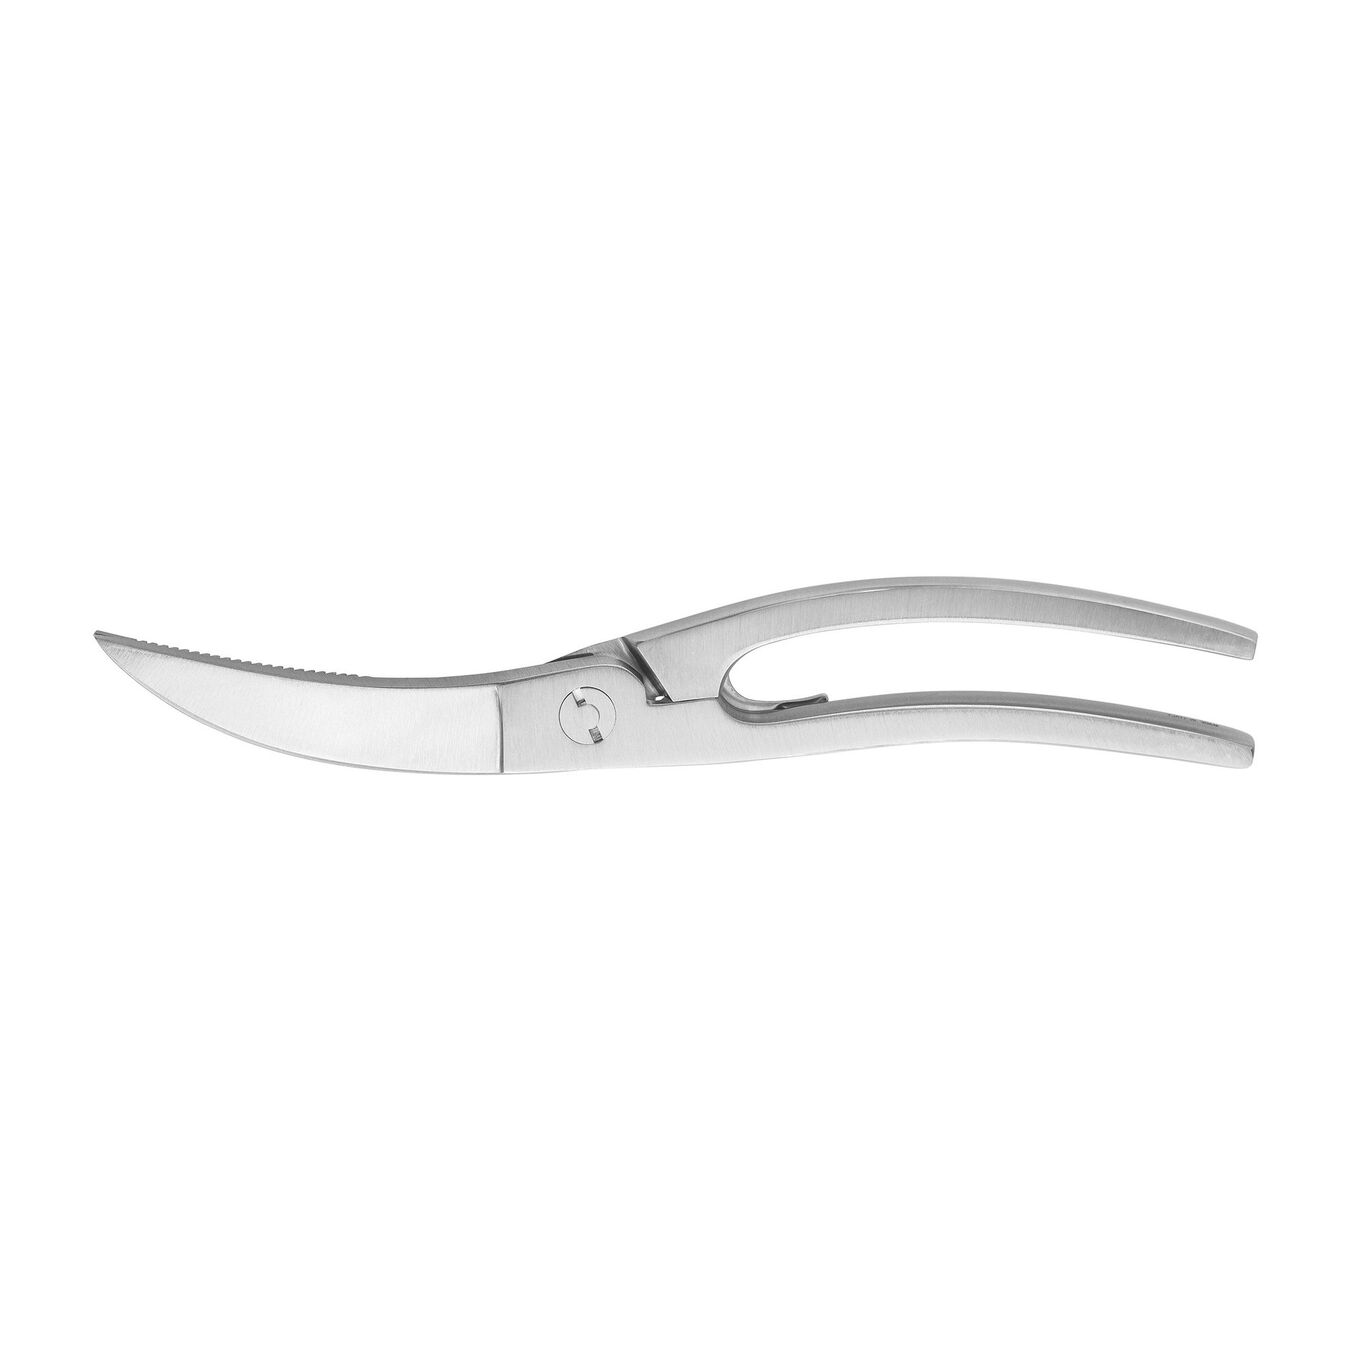 24 cm Stainless steel Poultry shears,,large 2